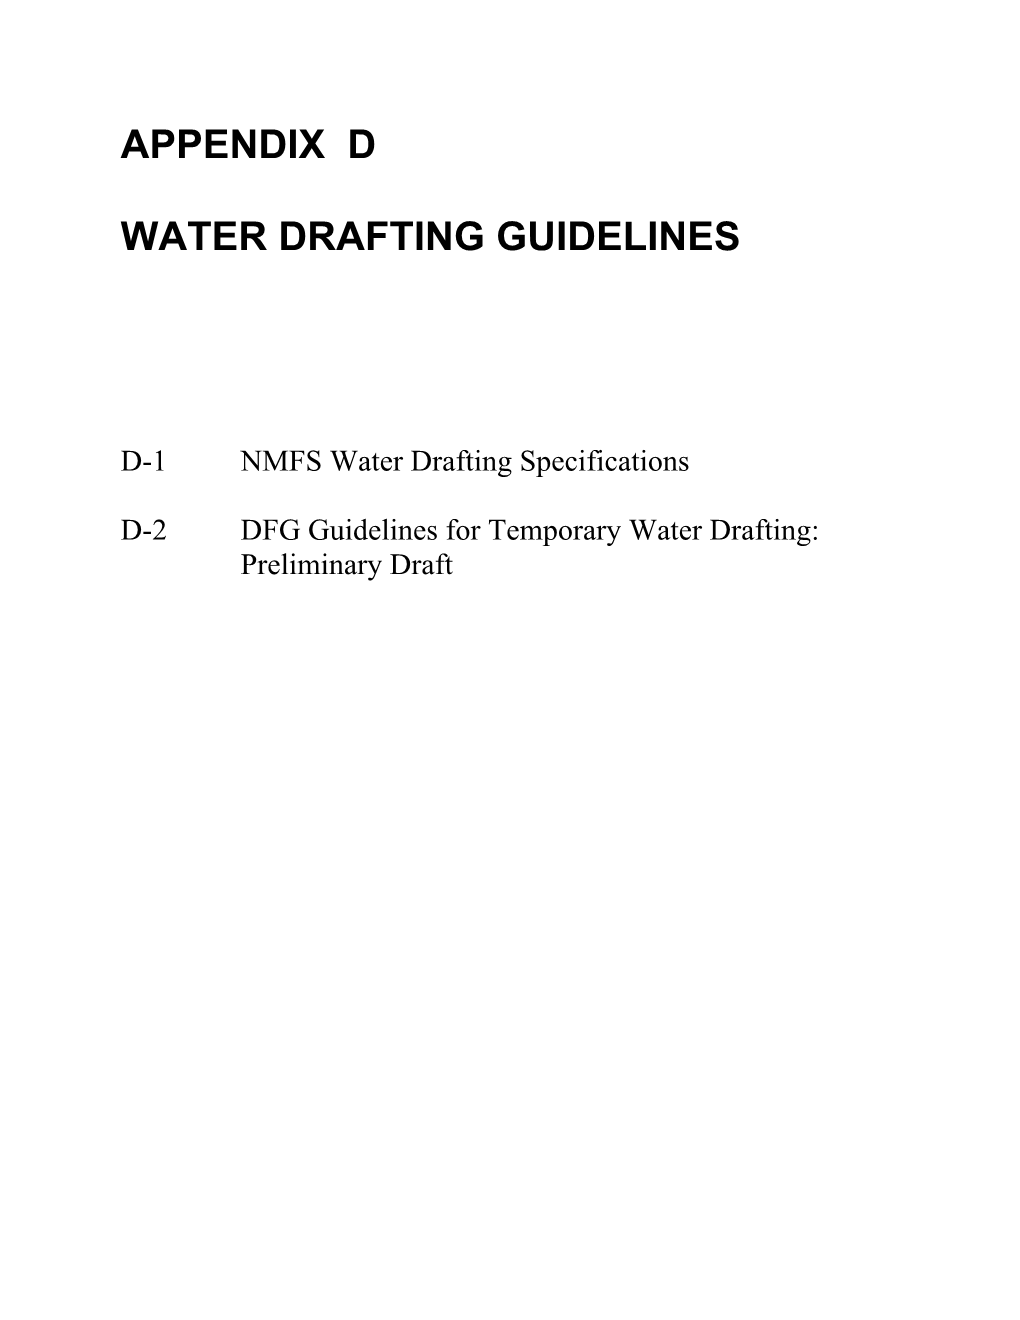 Appendix D Water Drafting Guidelines